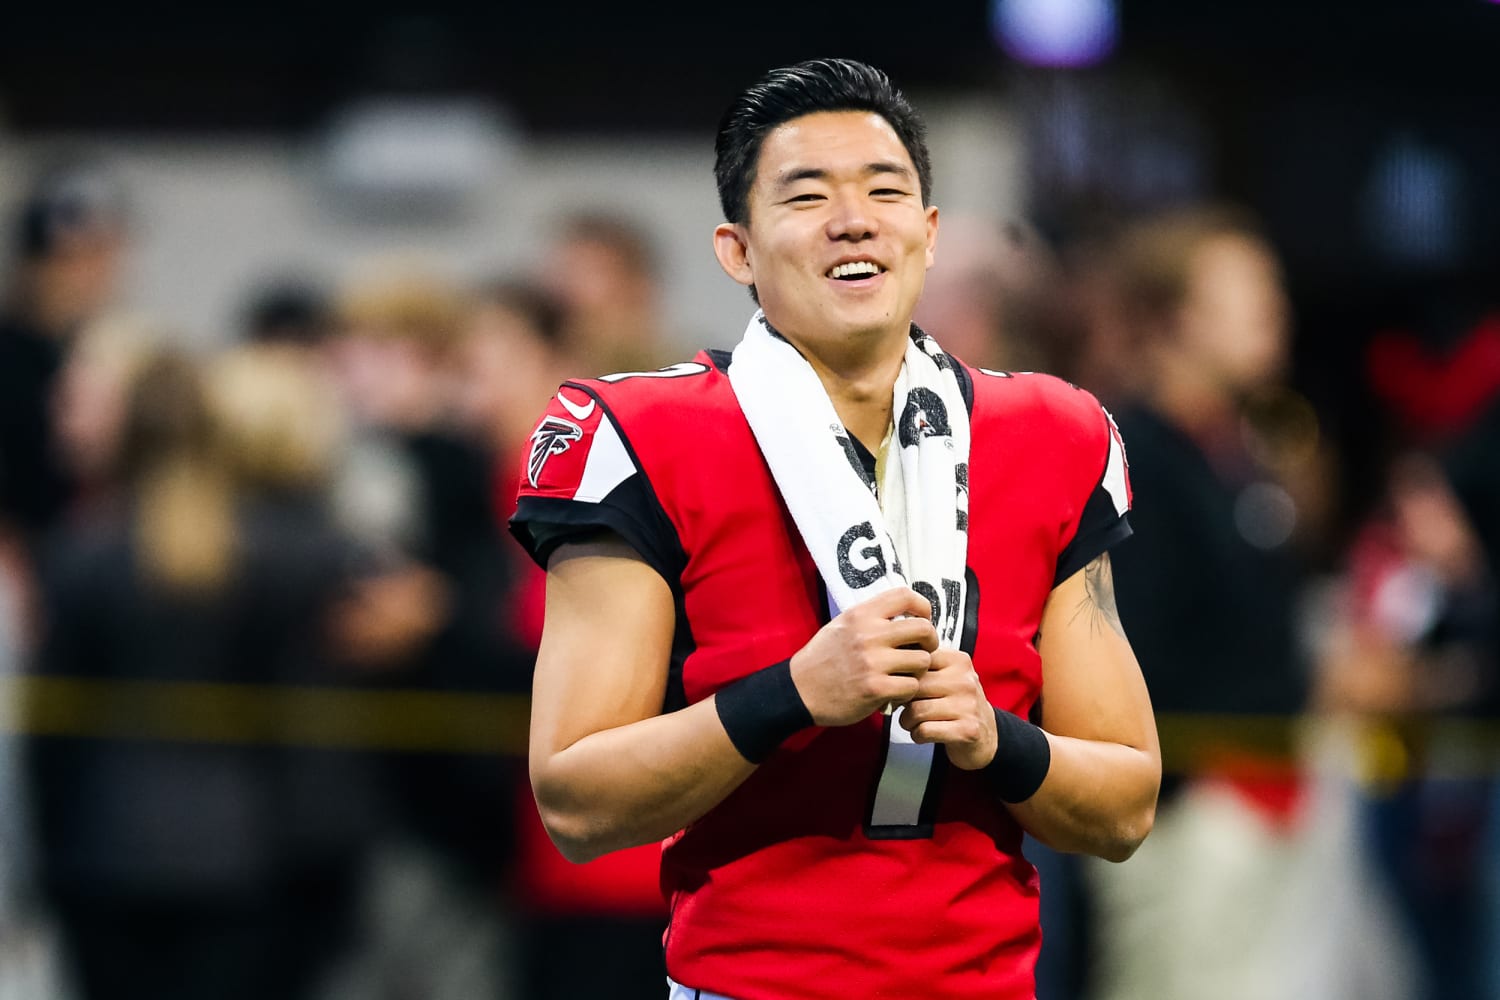 younghoe koo jersey falcons